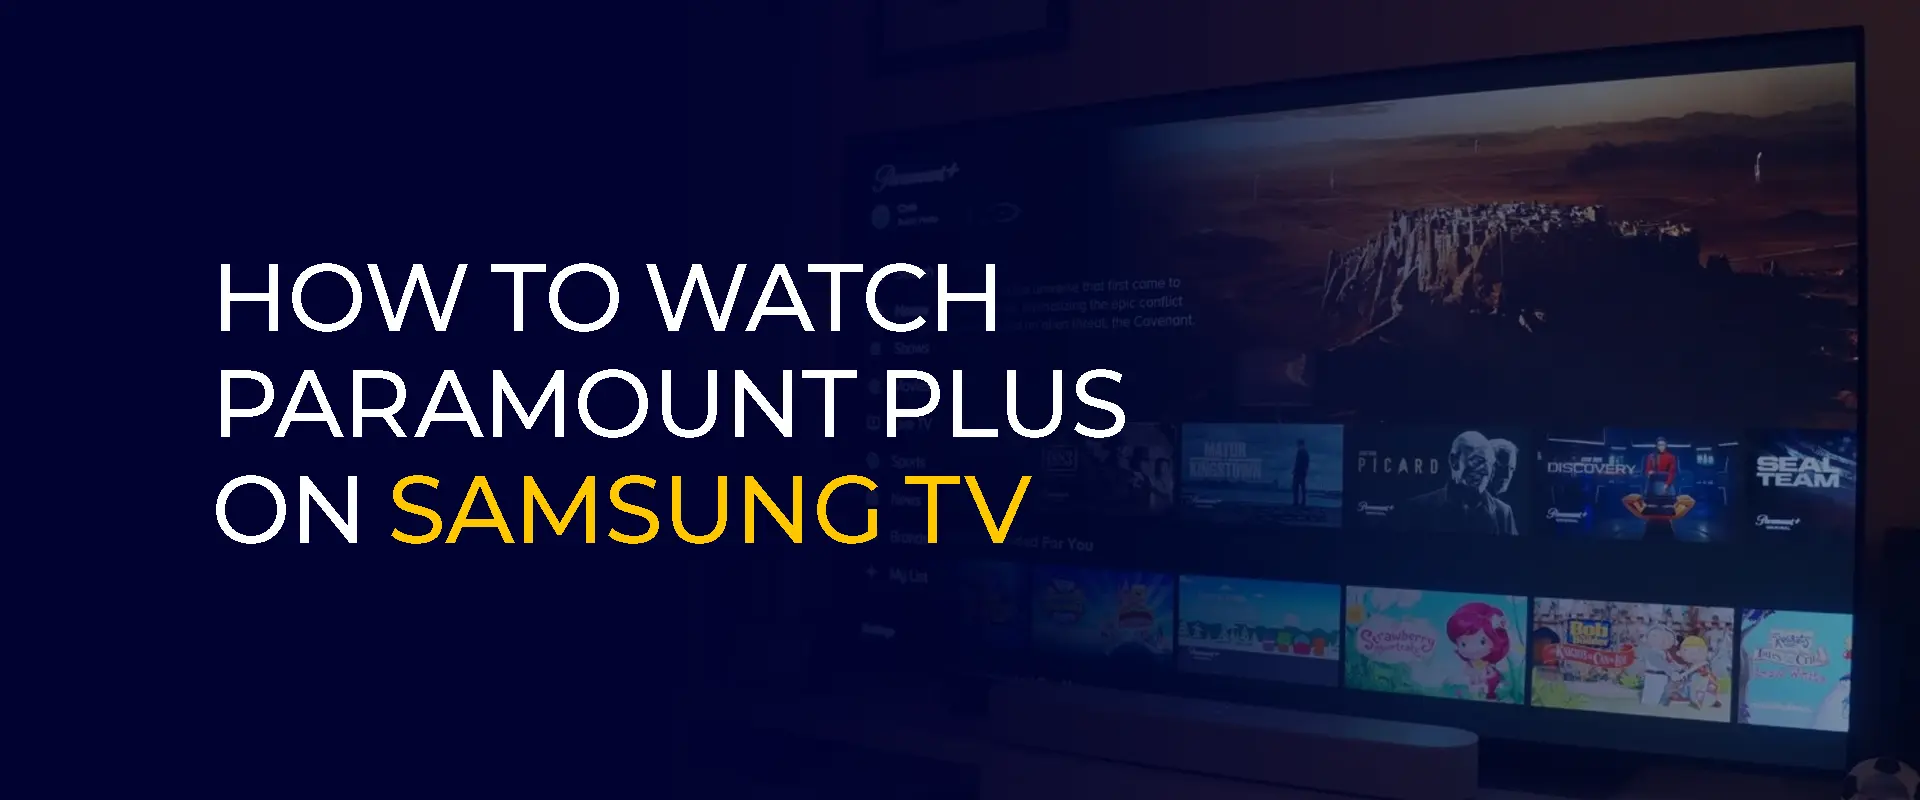 How to Watch Paramount Plus on Samsung TV